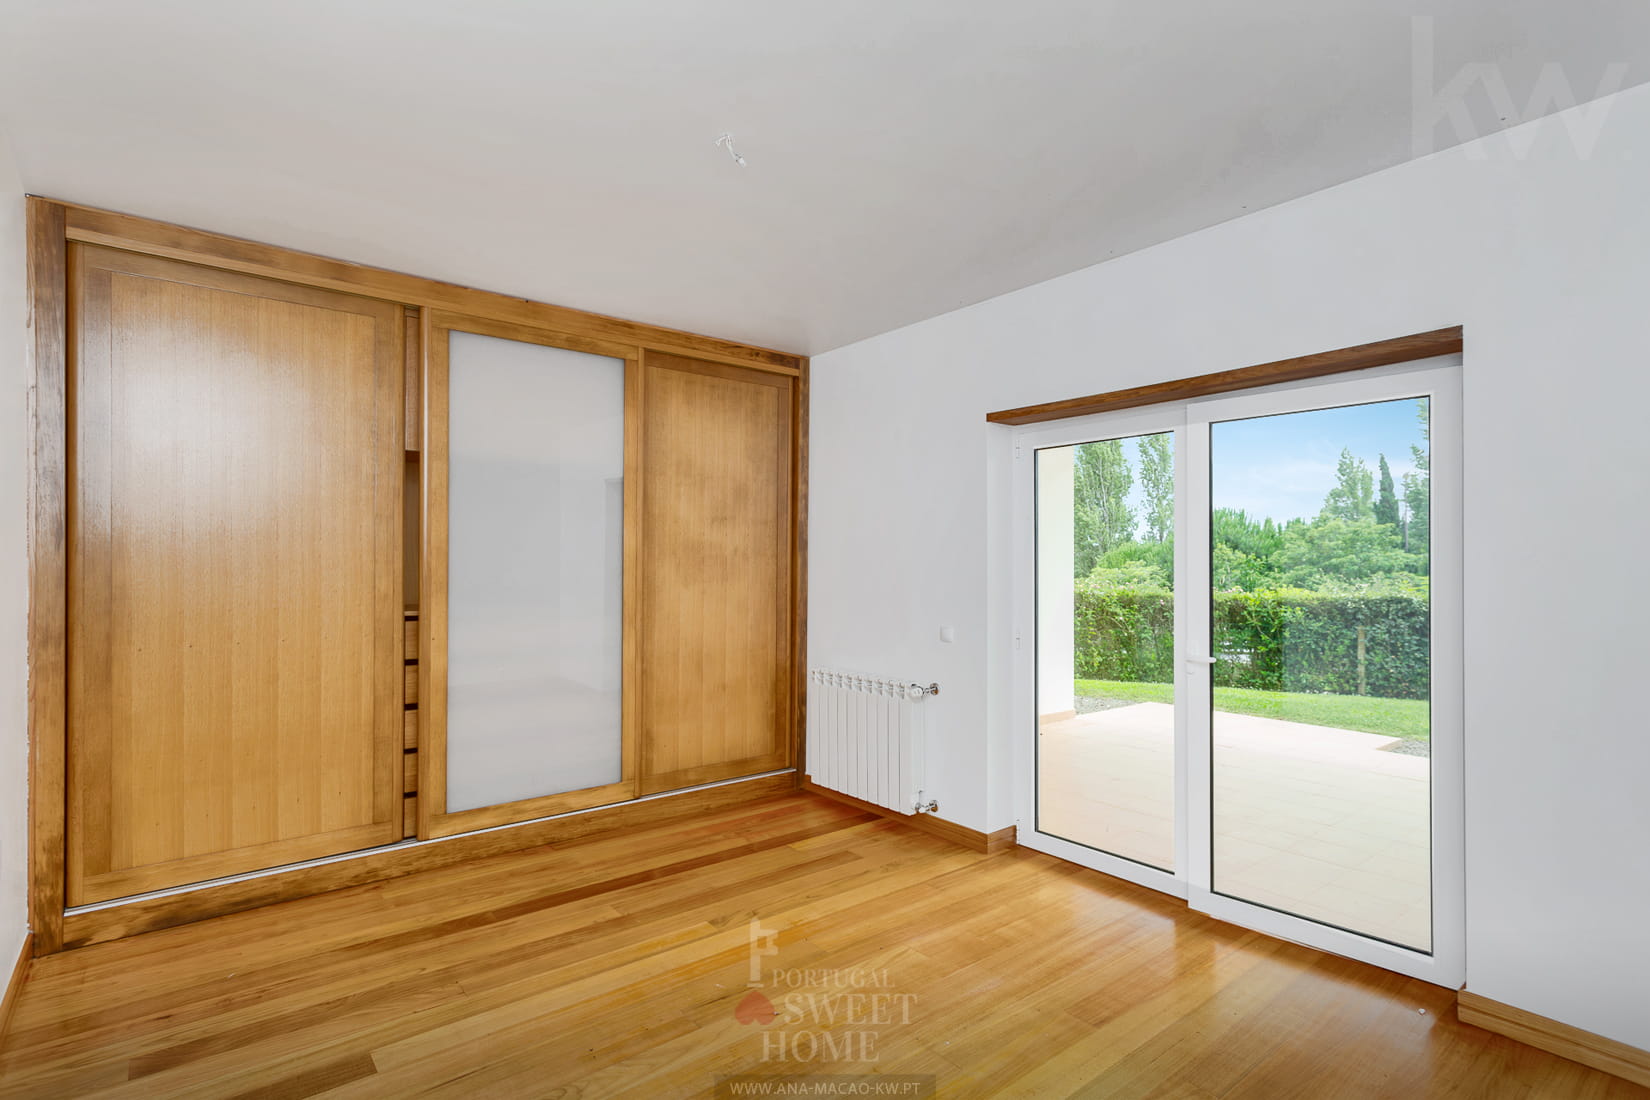 Suite (23.5 m²) with Closet and WC (4.9 m²)